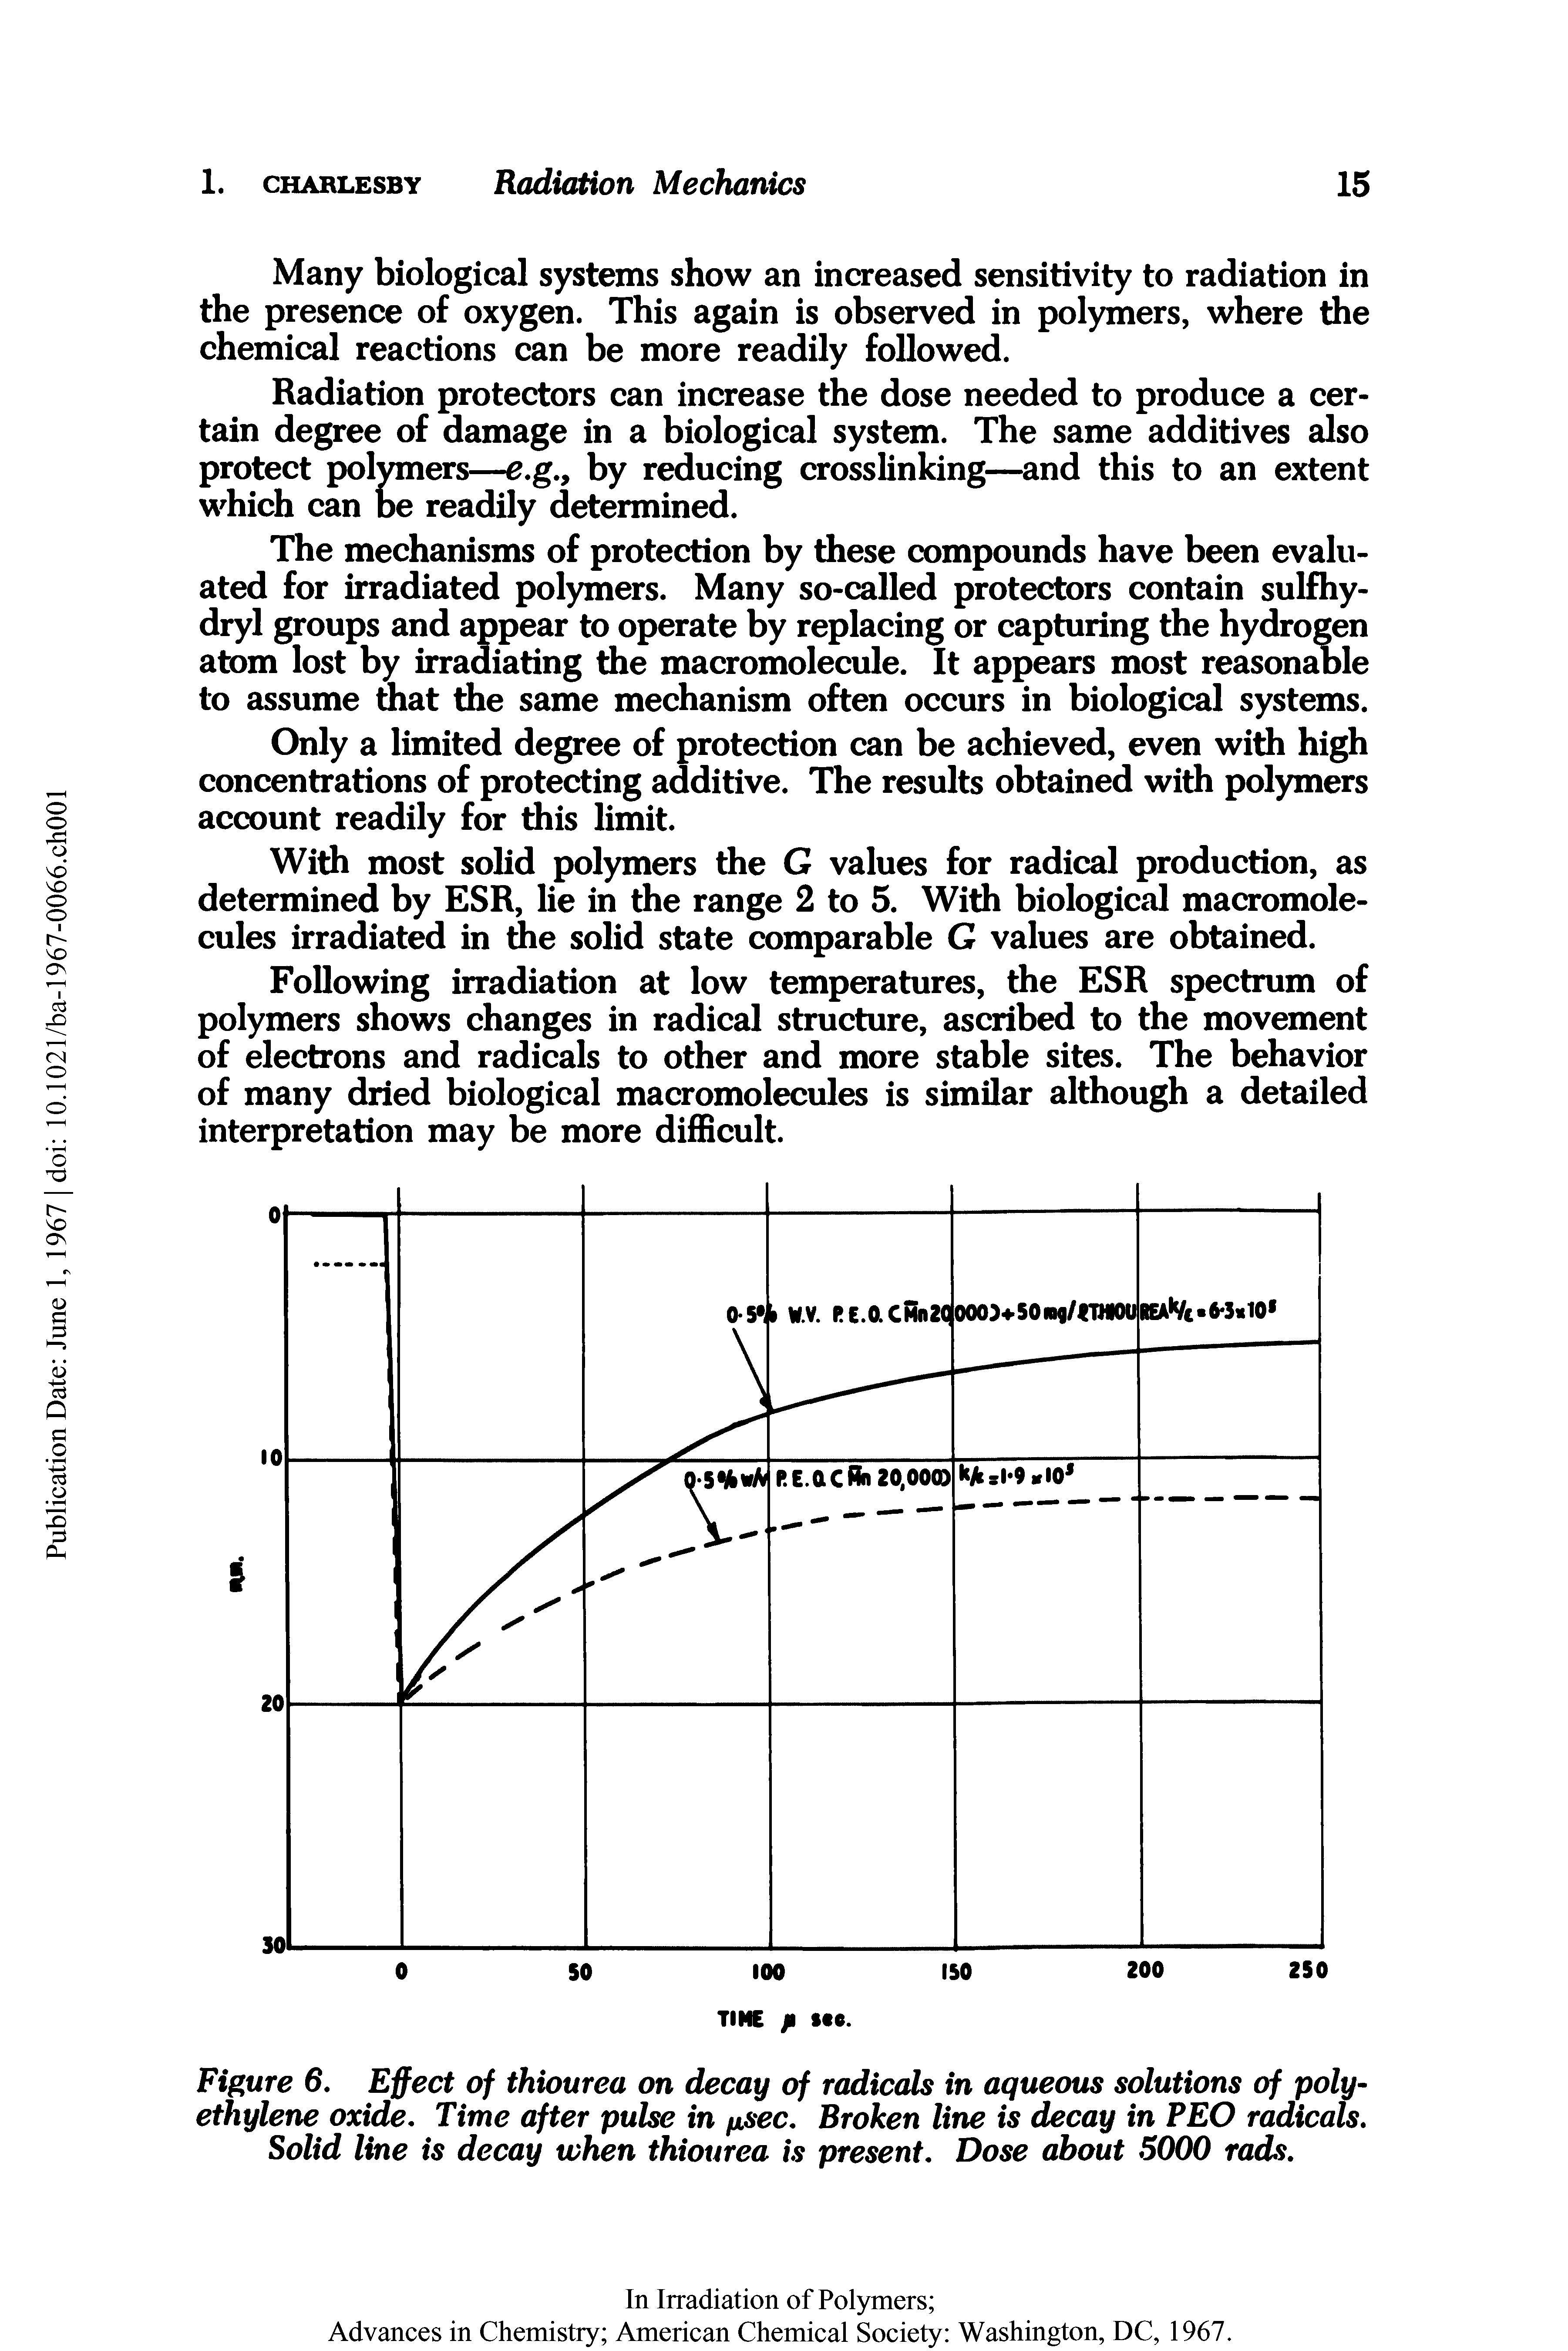 Figure 6. Effect of thiourea on decay of radicals in aqueous solutions of polyethylene oxide. Time after pulse in fisec. Broken line is decay in PEO radicals. Solid line is decay when thiourea is present. Dose about 5000 rads.